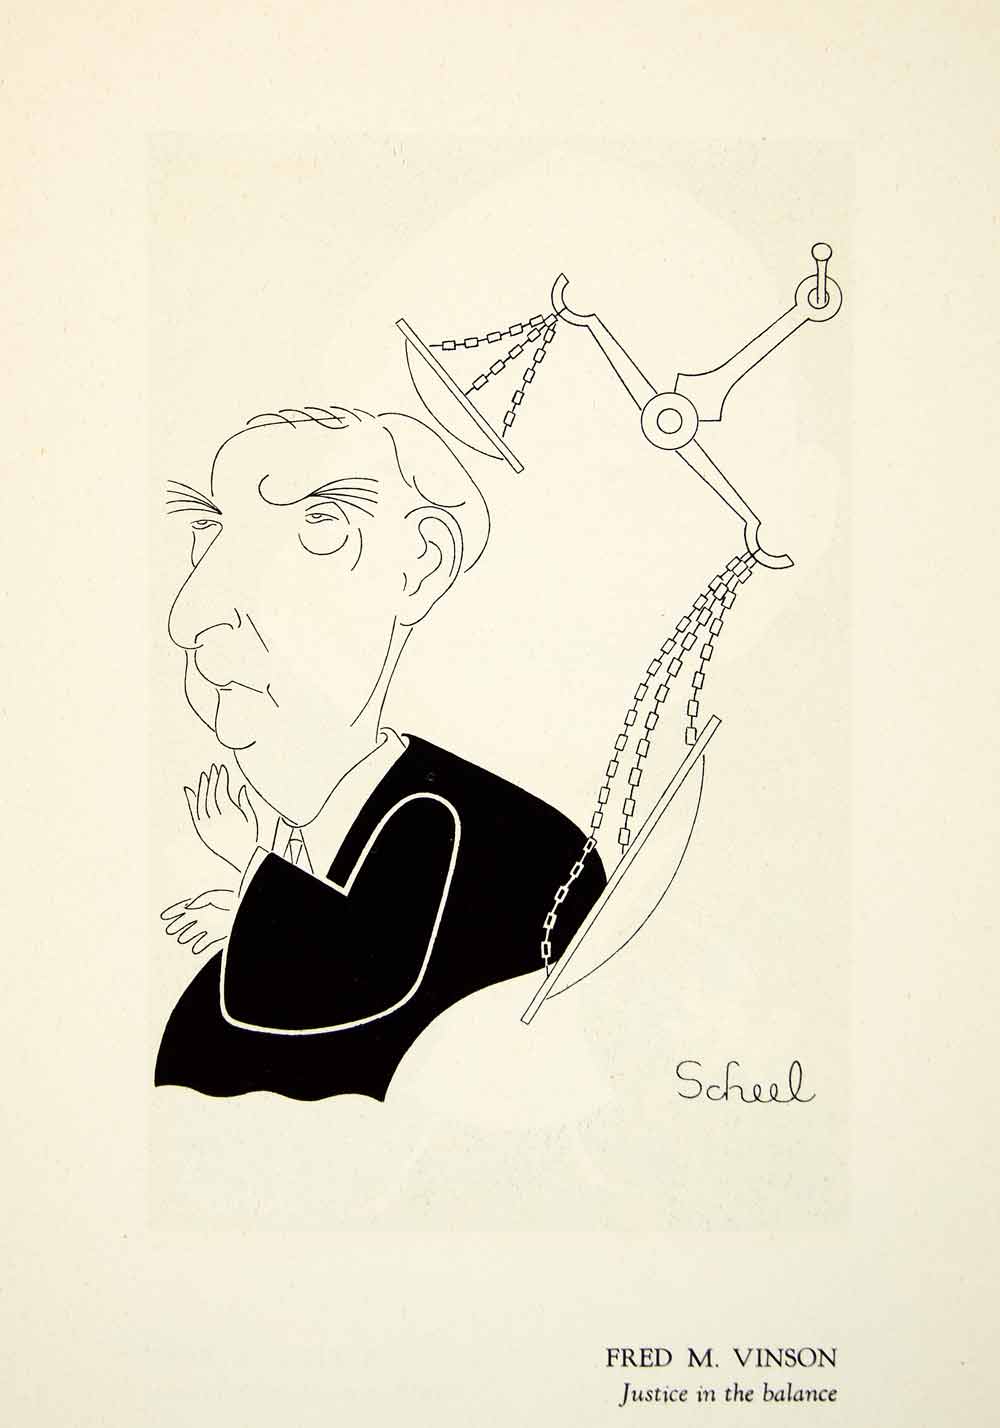 1951 Offset Lithograph Fred Vinson Justice Balance Caricature Theodor Scheel